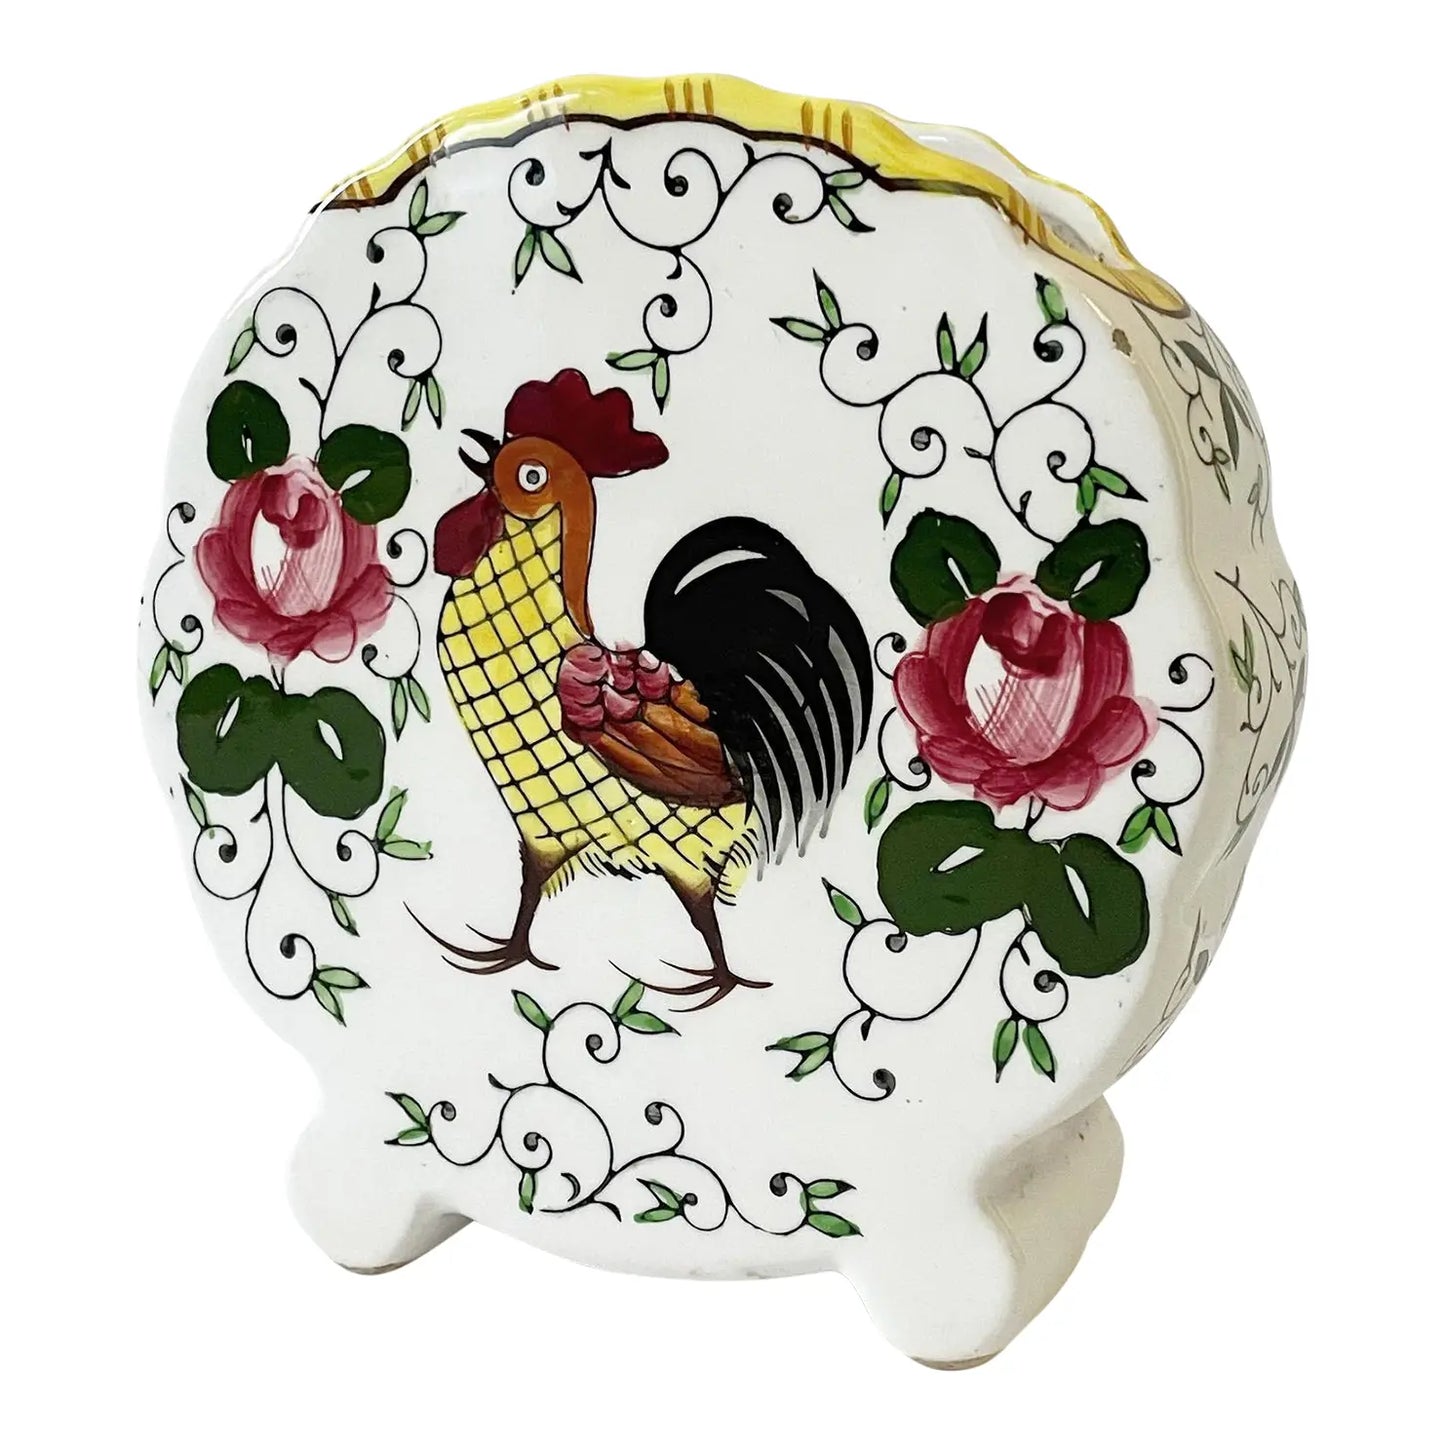 Vintage Round Hand-Painted Ceramic Vase With Center Rooster